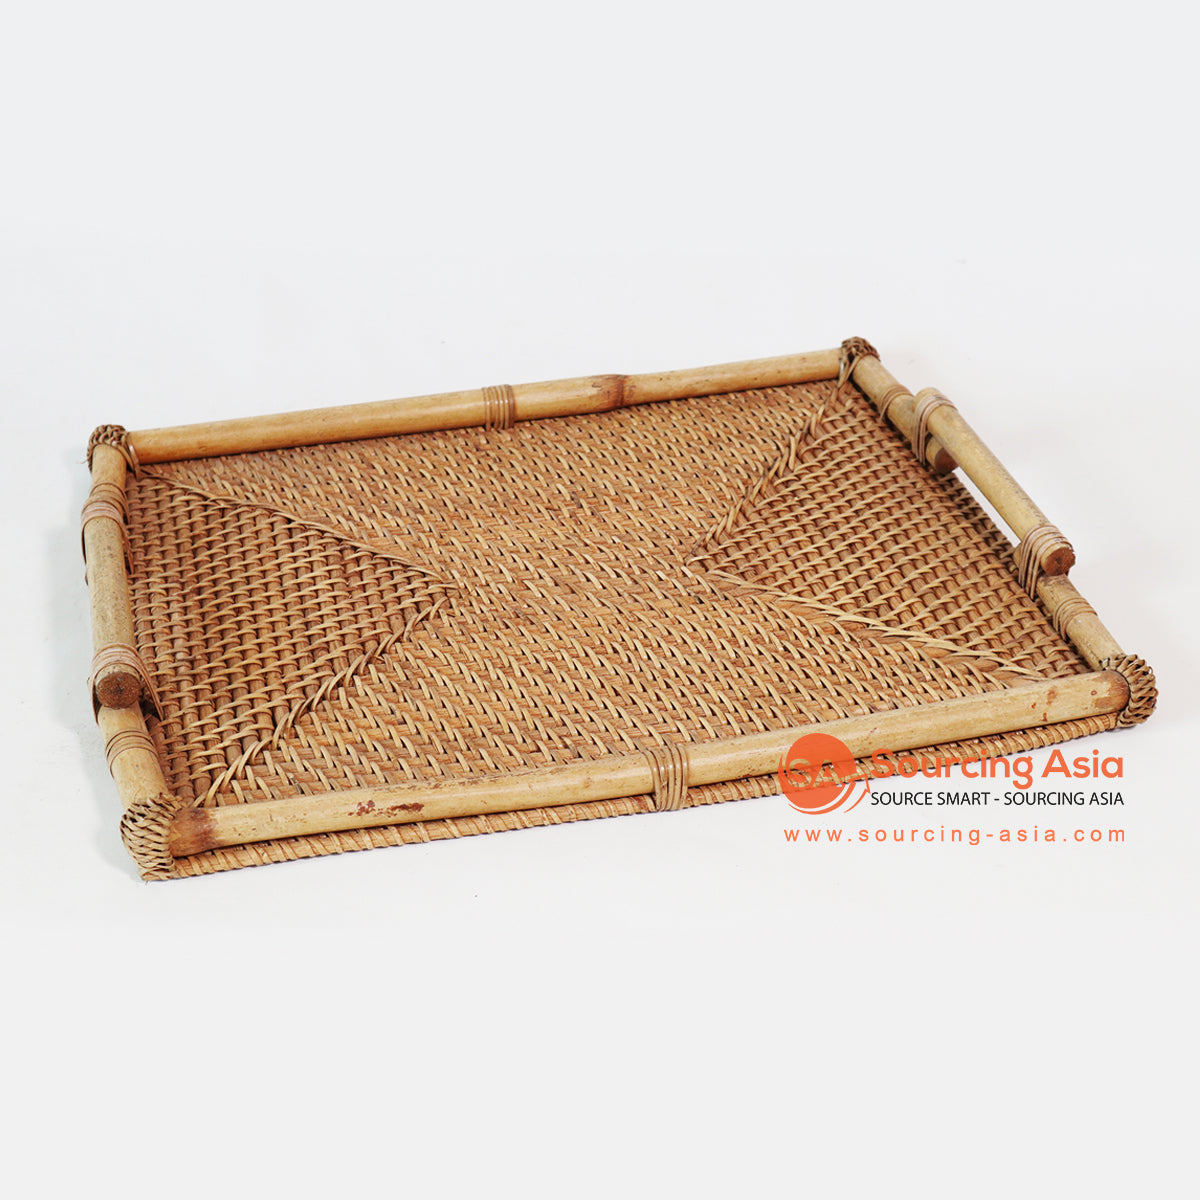 MTIC025 NATURAL WOVEN RATTAN RECTANGULAR TRAY WITH EDGES